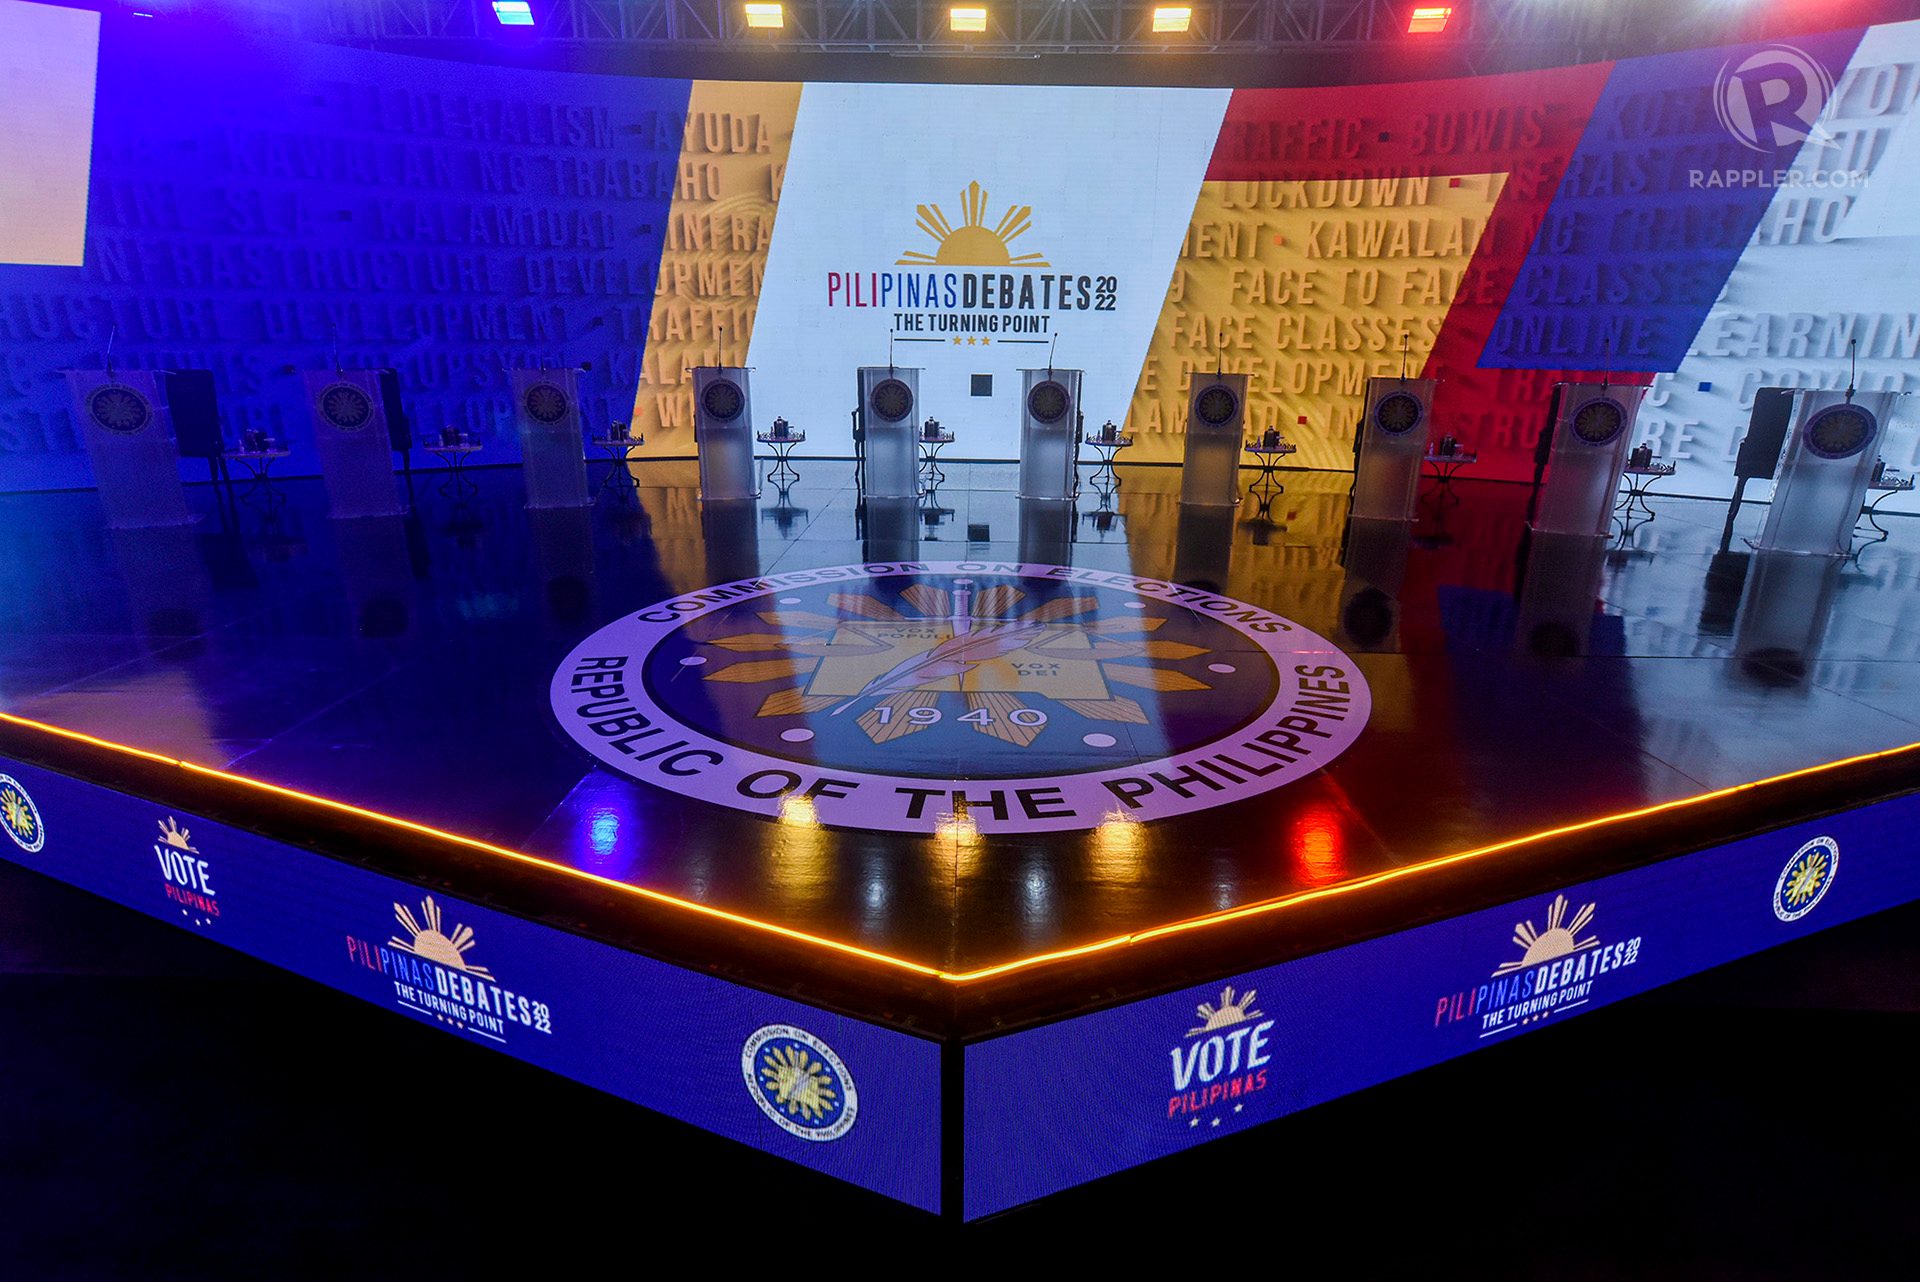 What to expect in Comelec’s 2nd presidential debate for 2022